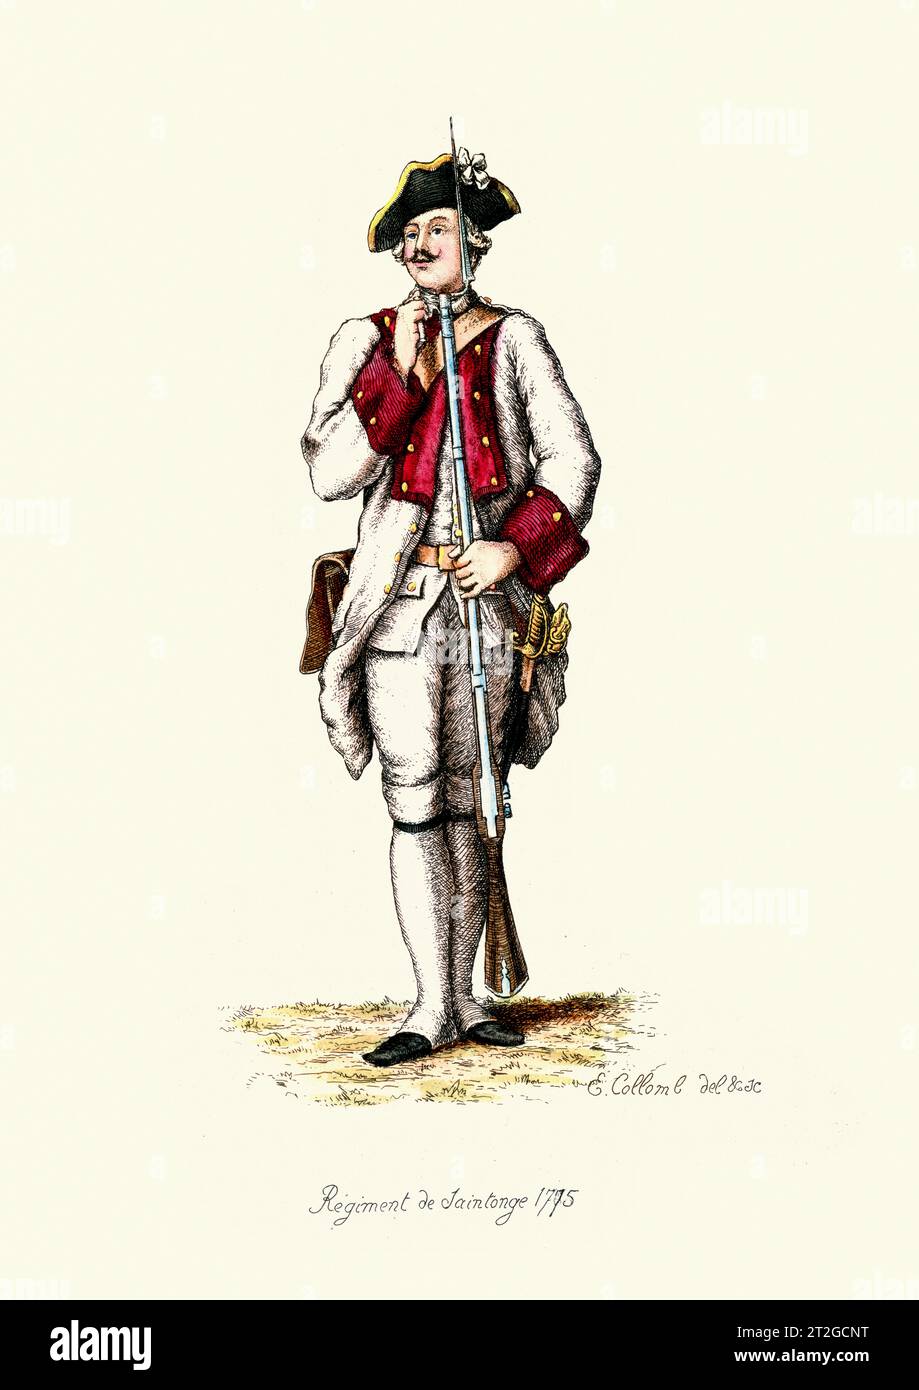 French Military Uniforms, 18th Century, History, Infantry solider, Musket and bayonet, Regiment de Saintonge Stock Photo